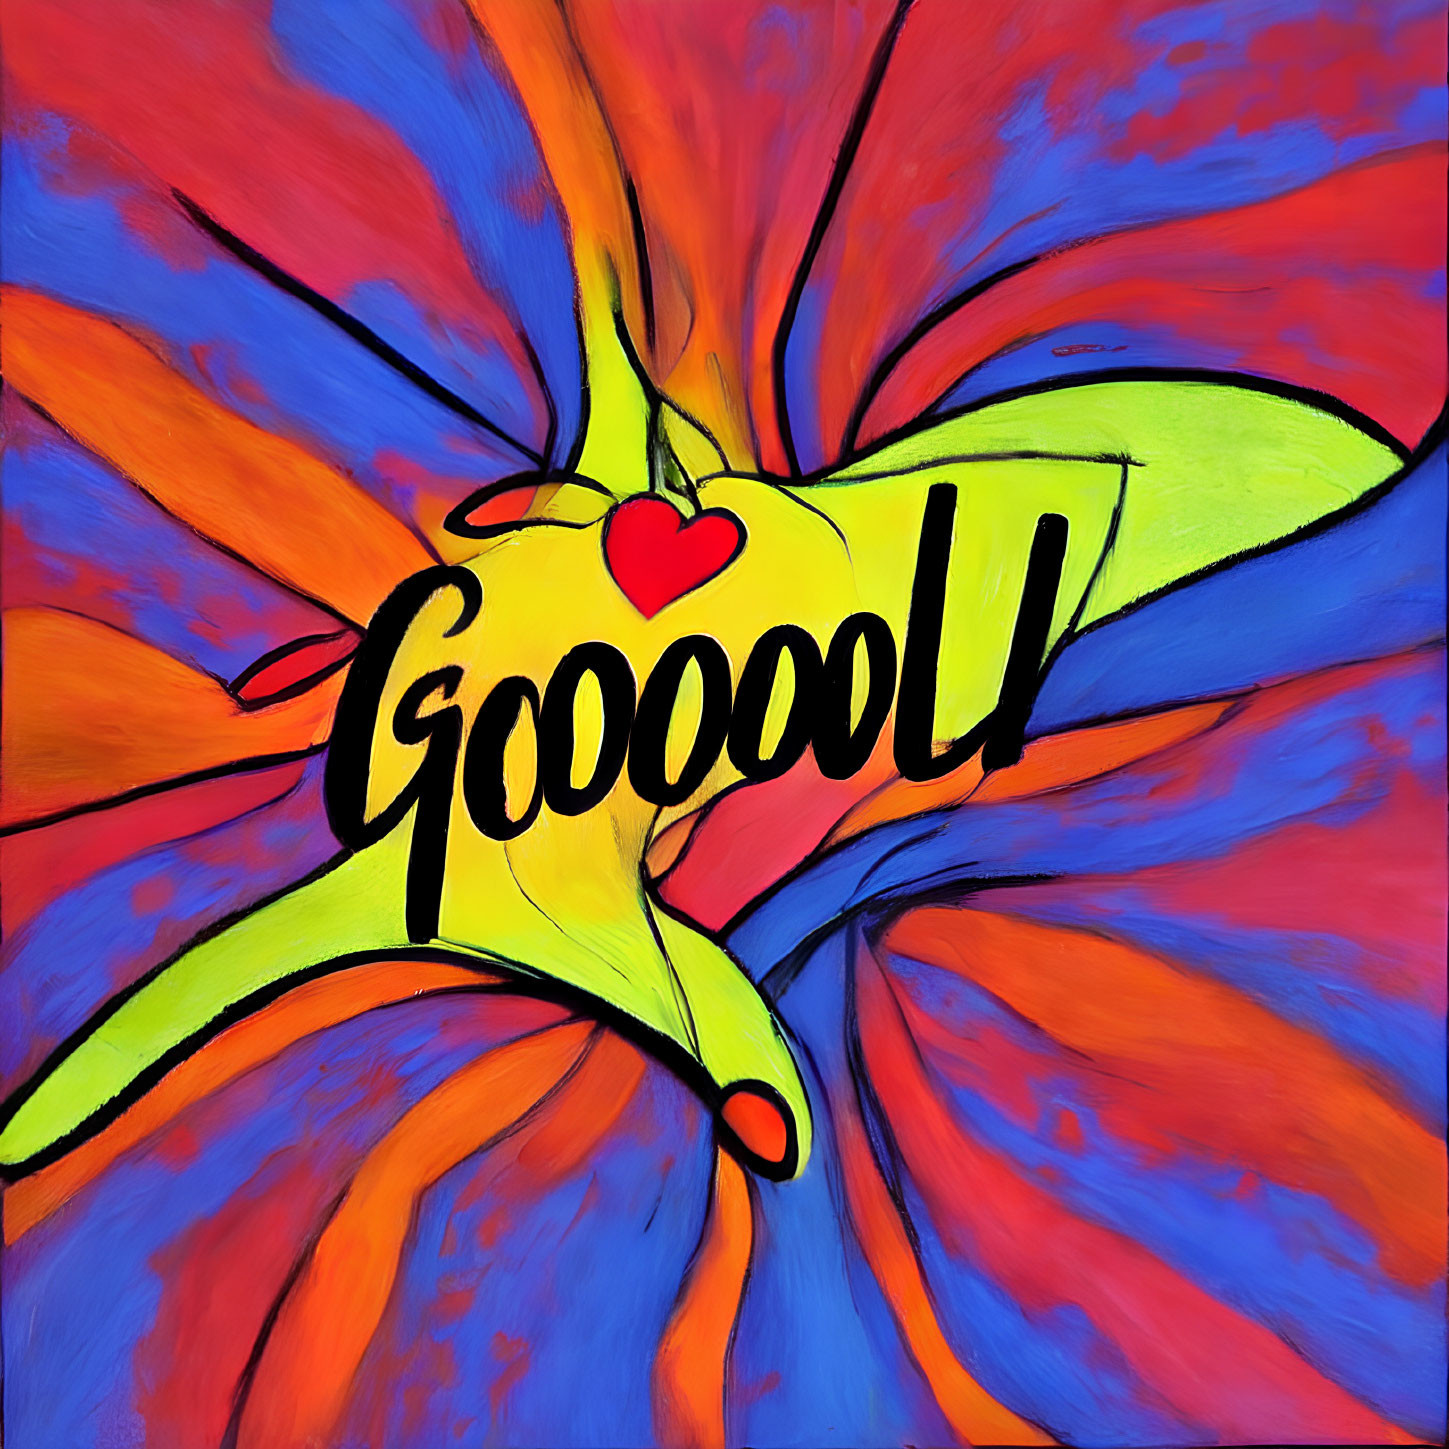 Colorful Banana Artwork with "Gooool" Word and Heart Design